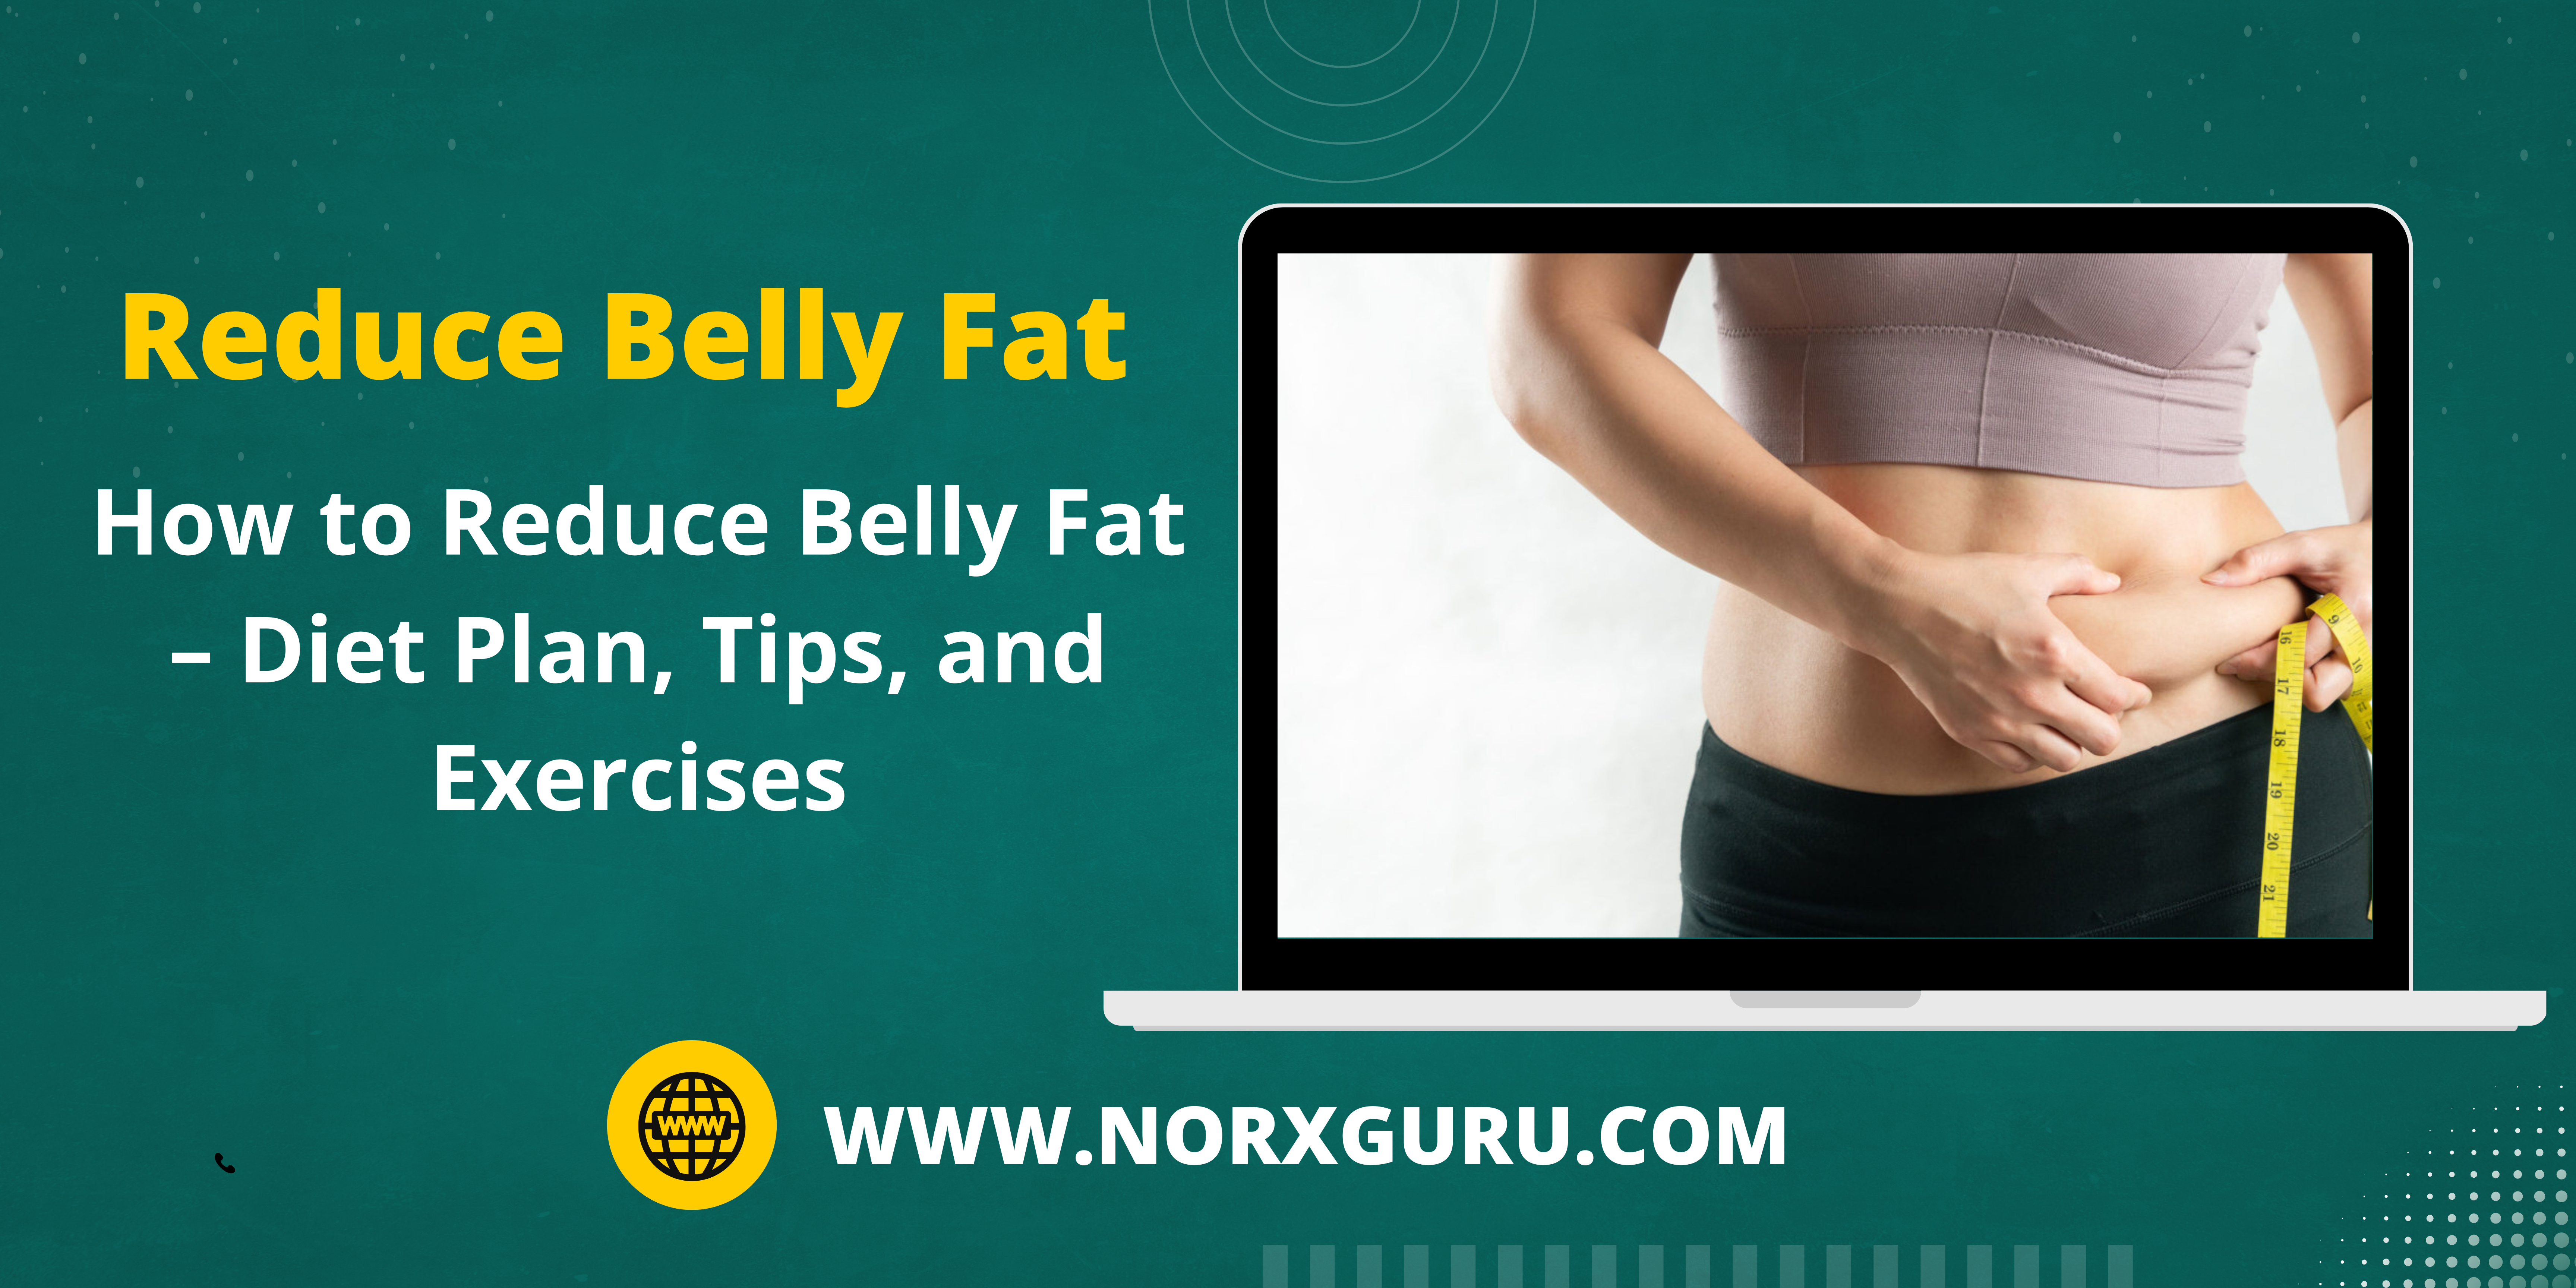 How to Reduce Belly Fat – Diet Plan, Tips, and Exercises